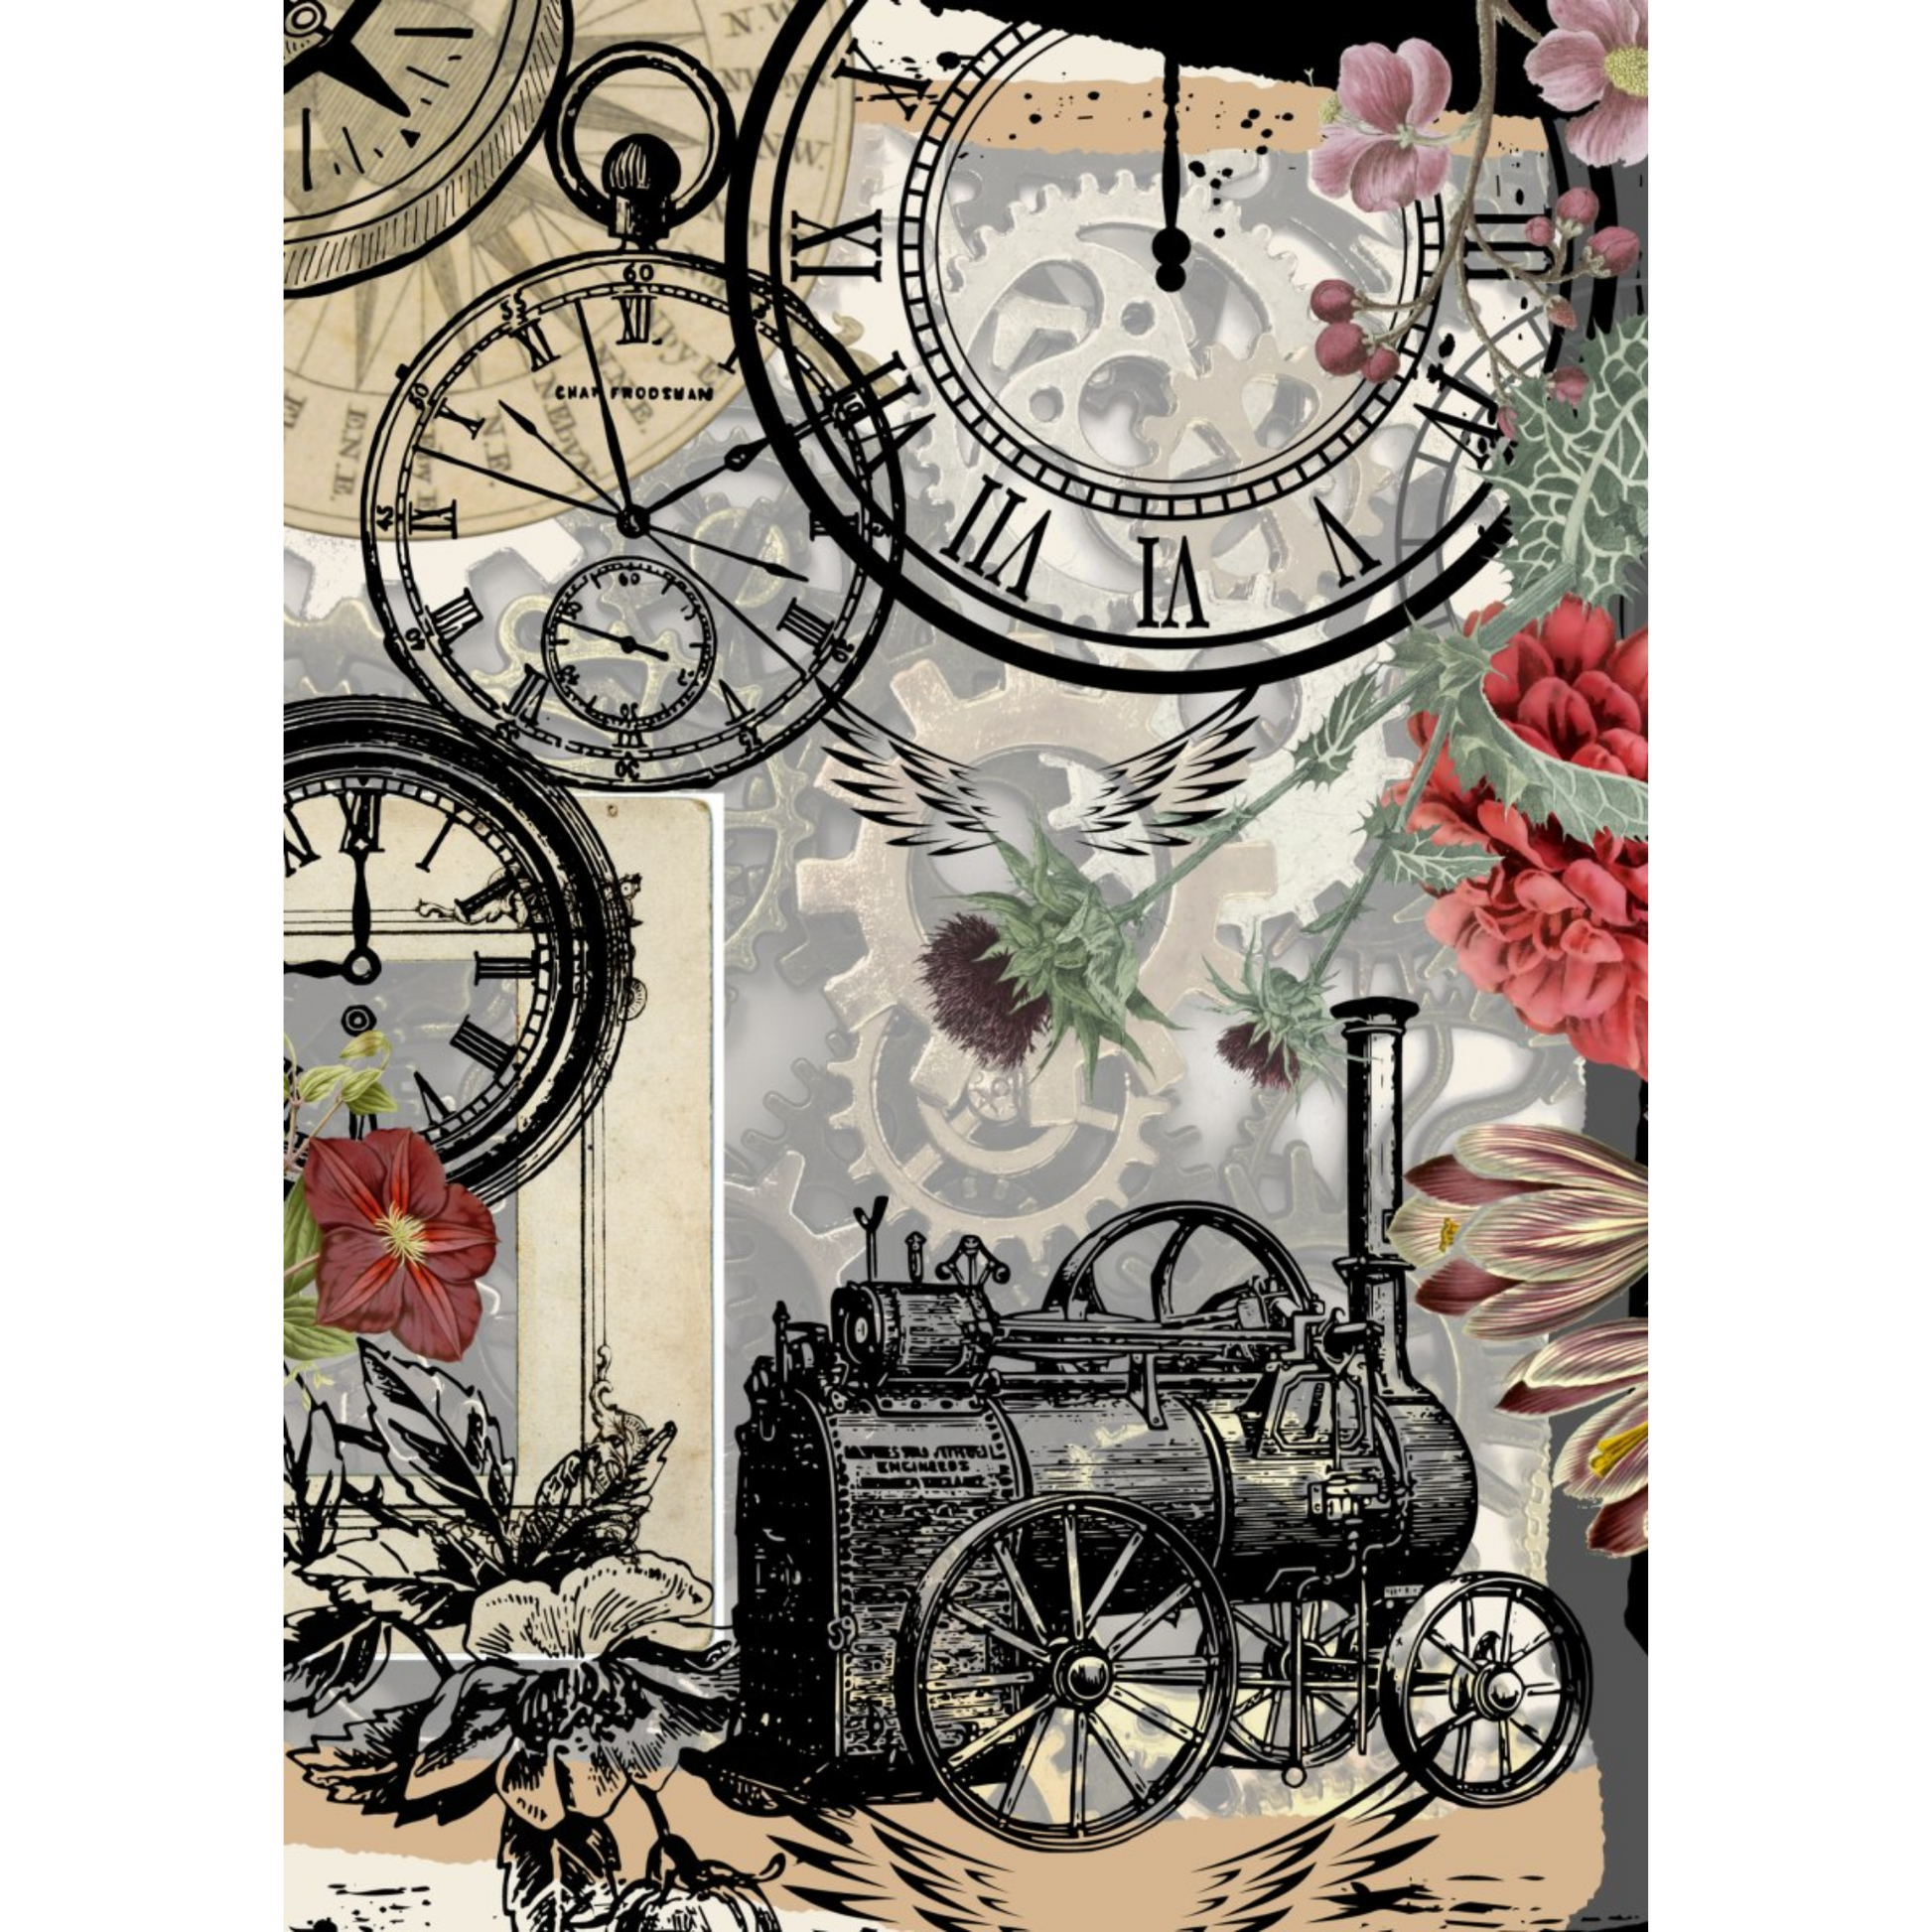 "Skulduggery" decoupage paper set by Made by Marley available at Milton's Daughter. Photo depicts single sheet of steampunk imagery included in this 3-piece set.